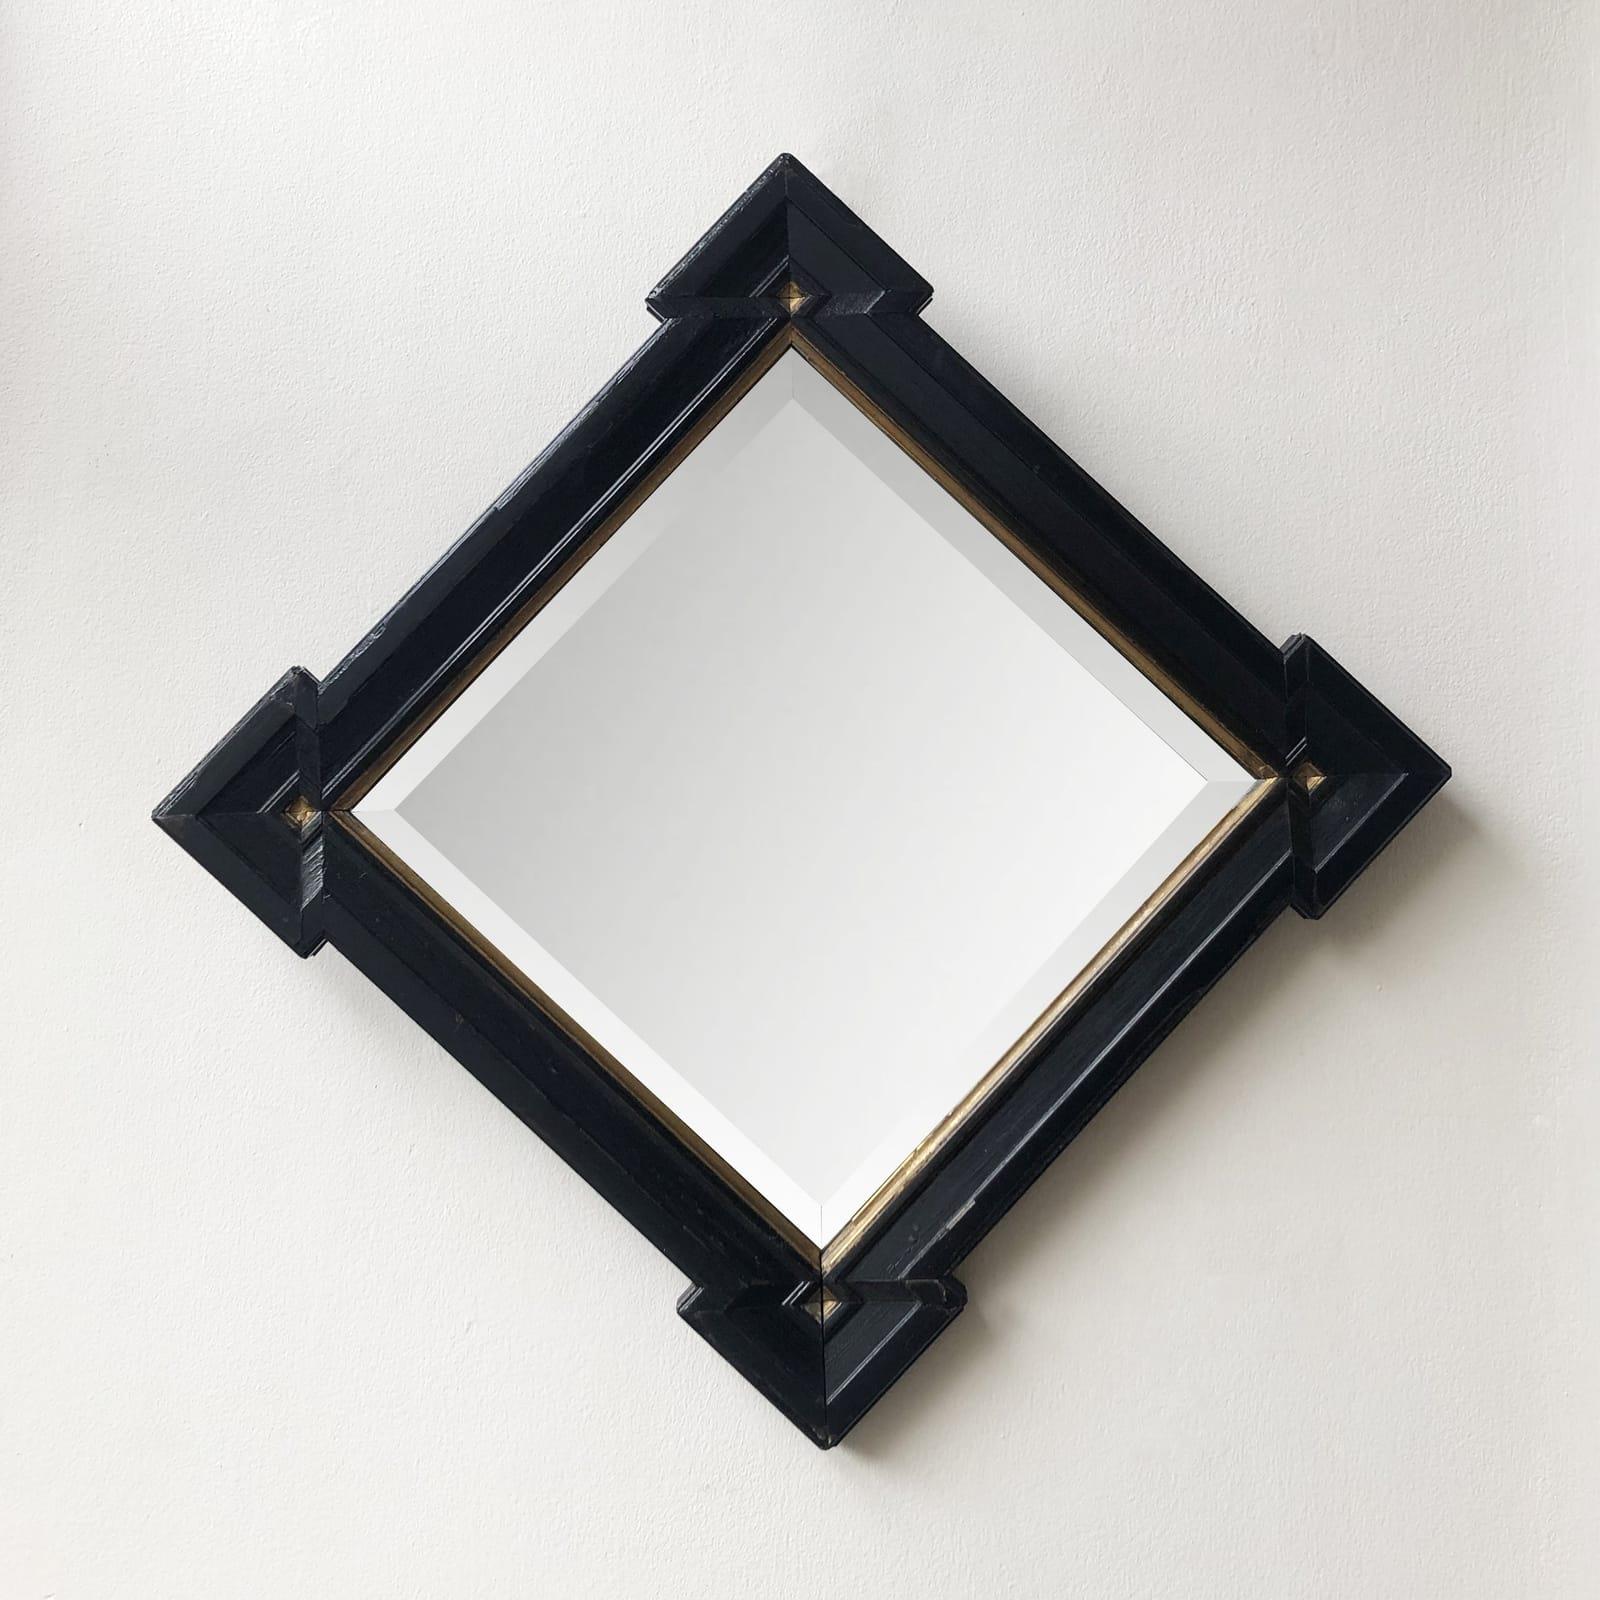 English turn-of-the-century square wall mirror with ebonized frame and gilt detailing. A wonderful example of the Aesthetic movement's design principles in application. With its simple, geometric shape and clear commitment to craftsmanship, the